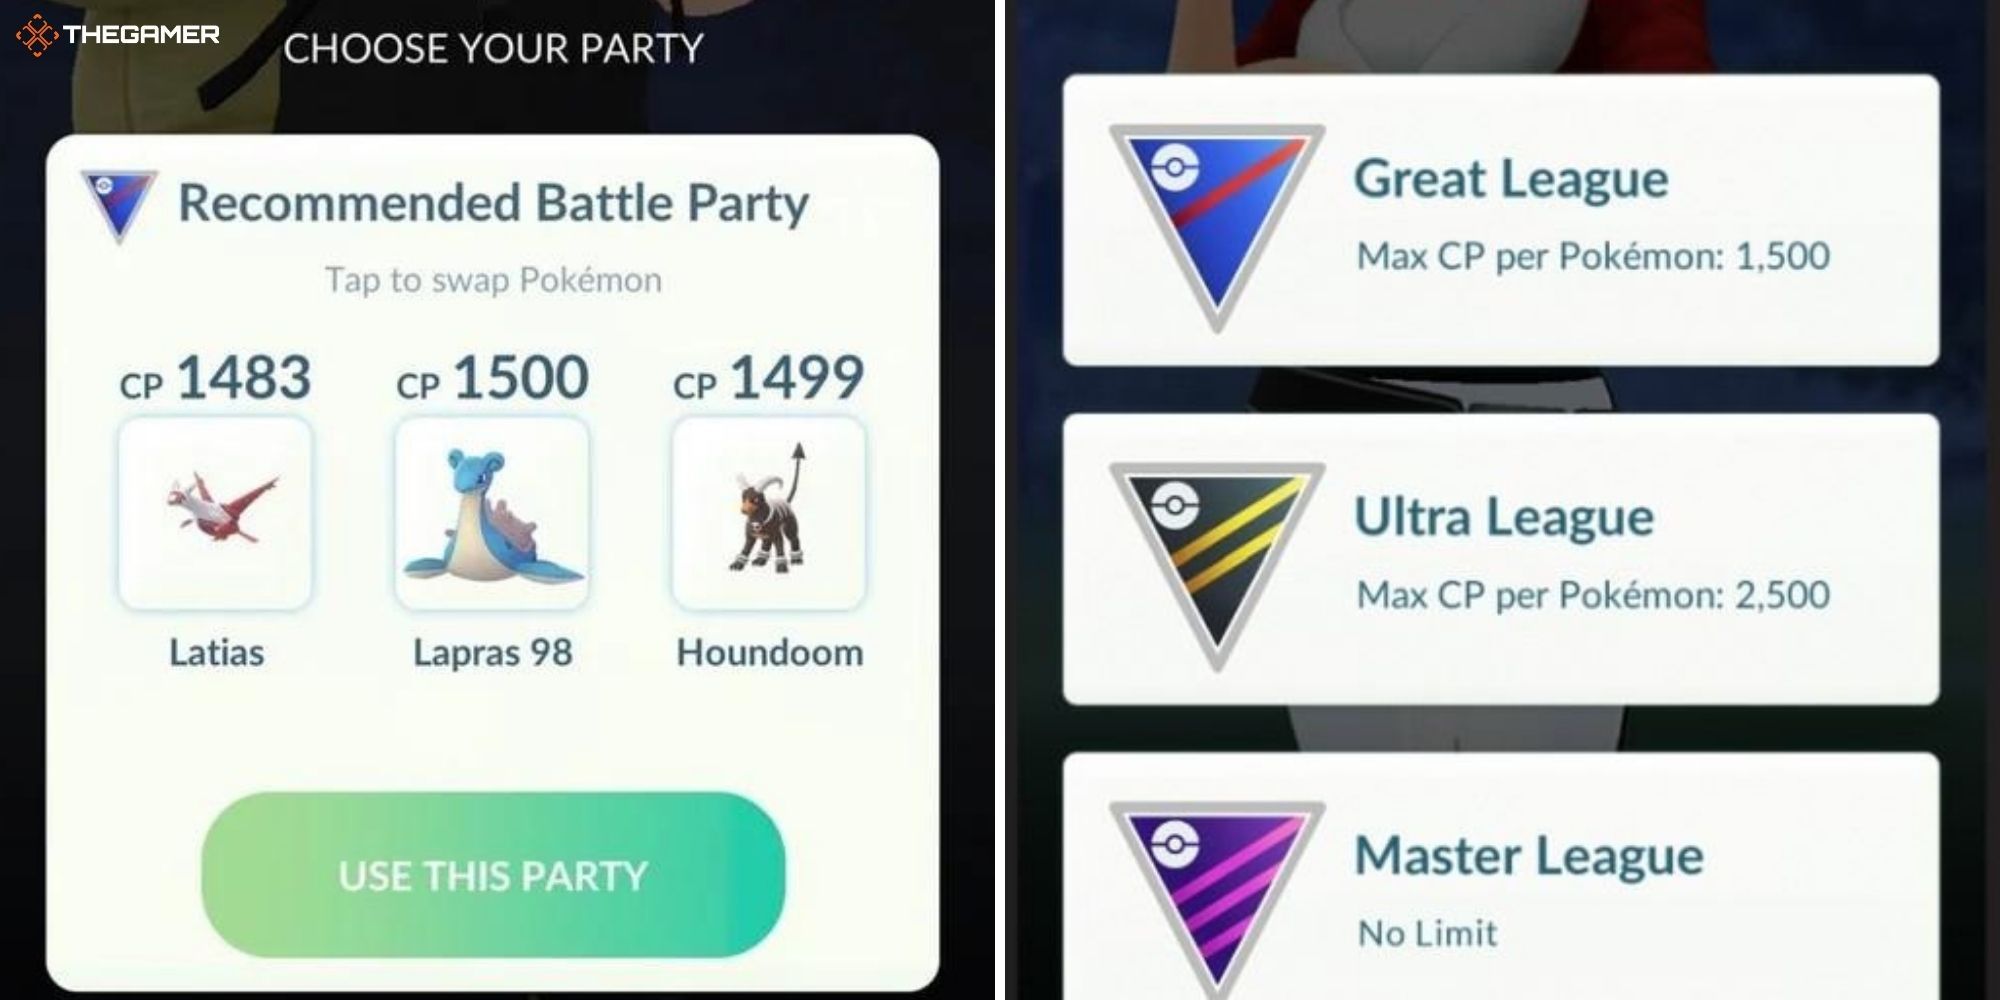 Pokemon GO Recommended Battle Party on left, Player battle leagues on right